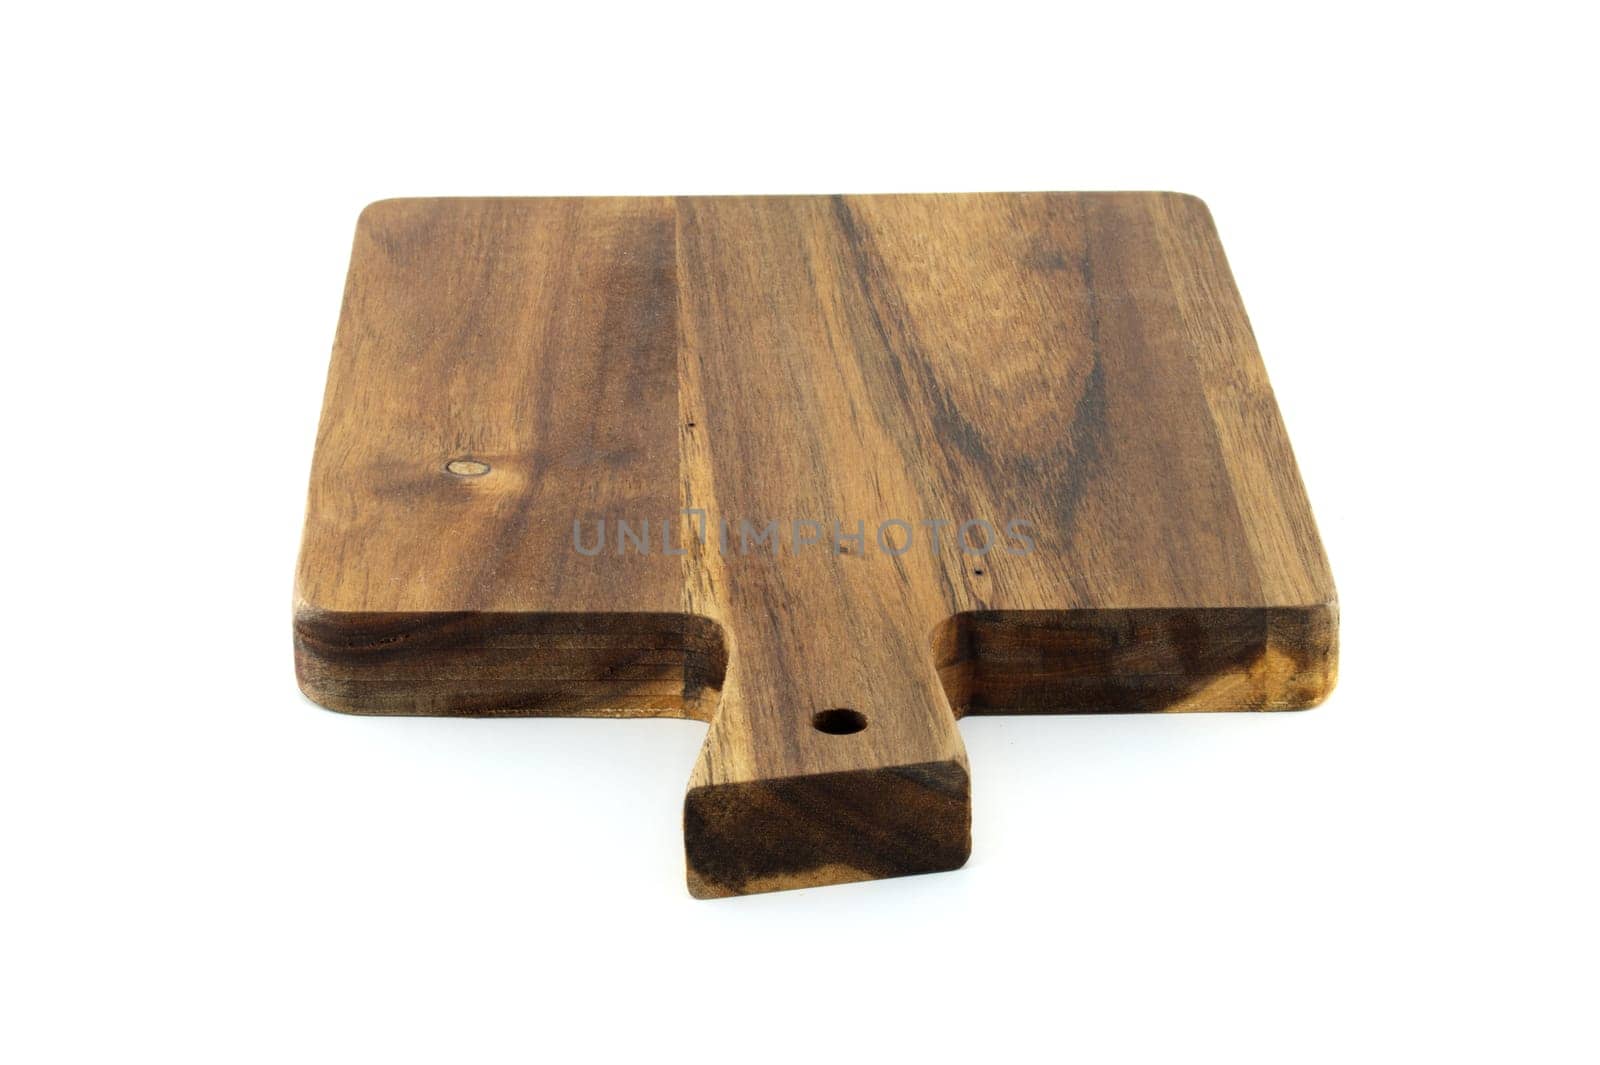 Wooden cutting board with a handle, made from old, thick wood, and bears a rustic, vintage appearance characterized by cracks, scratches, isolated on a white background